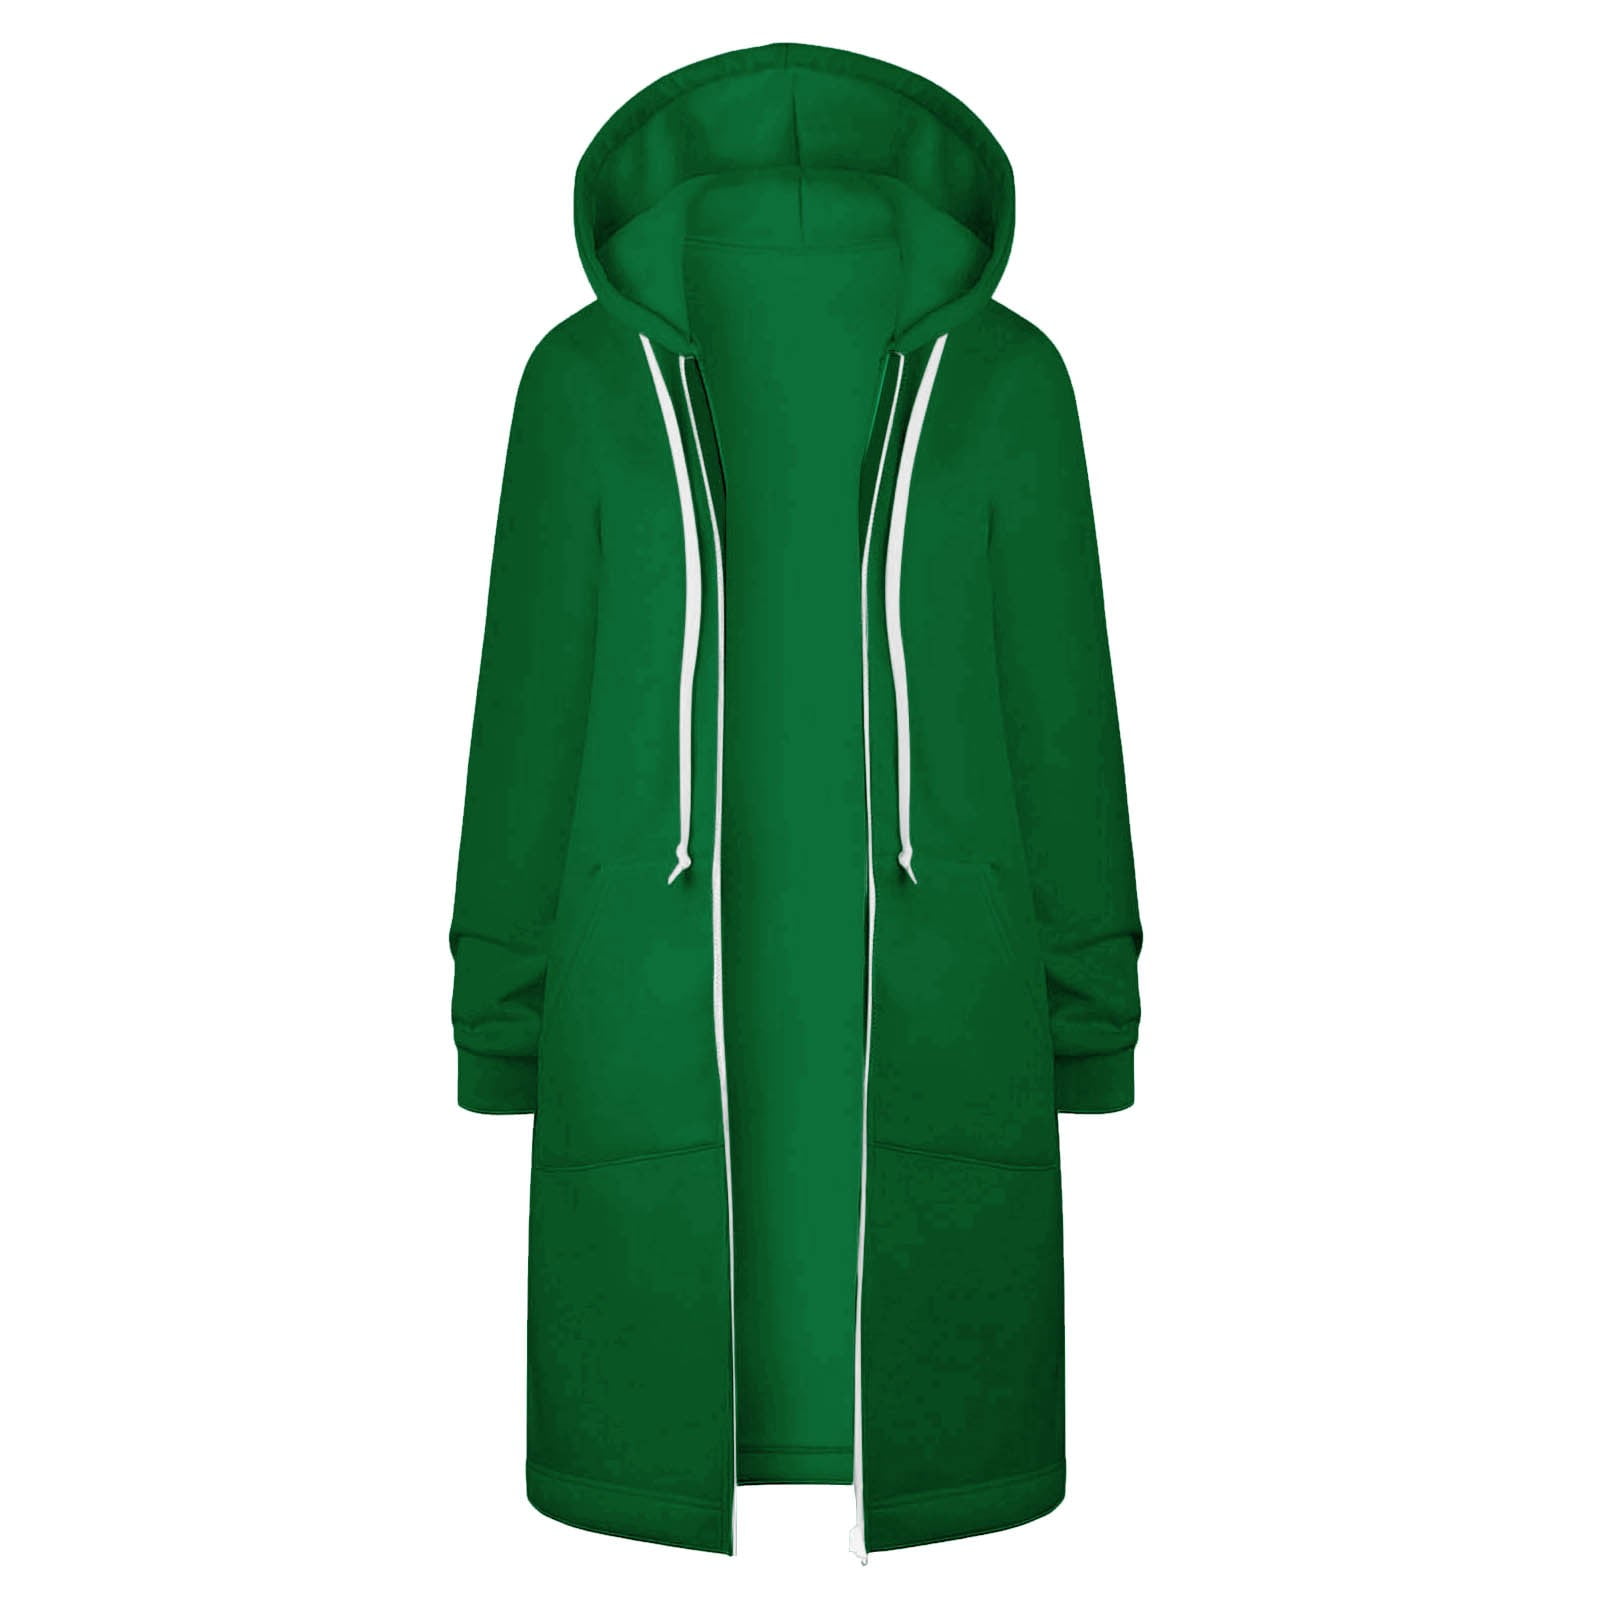 Lisingtool Womens Tops Ladies Casual Long Hooded Drawstring Solid Color ...